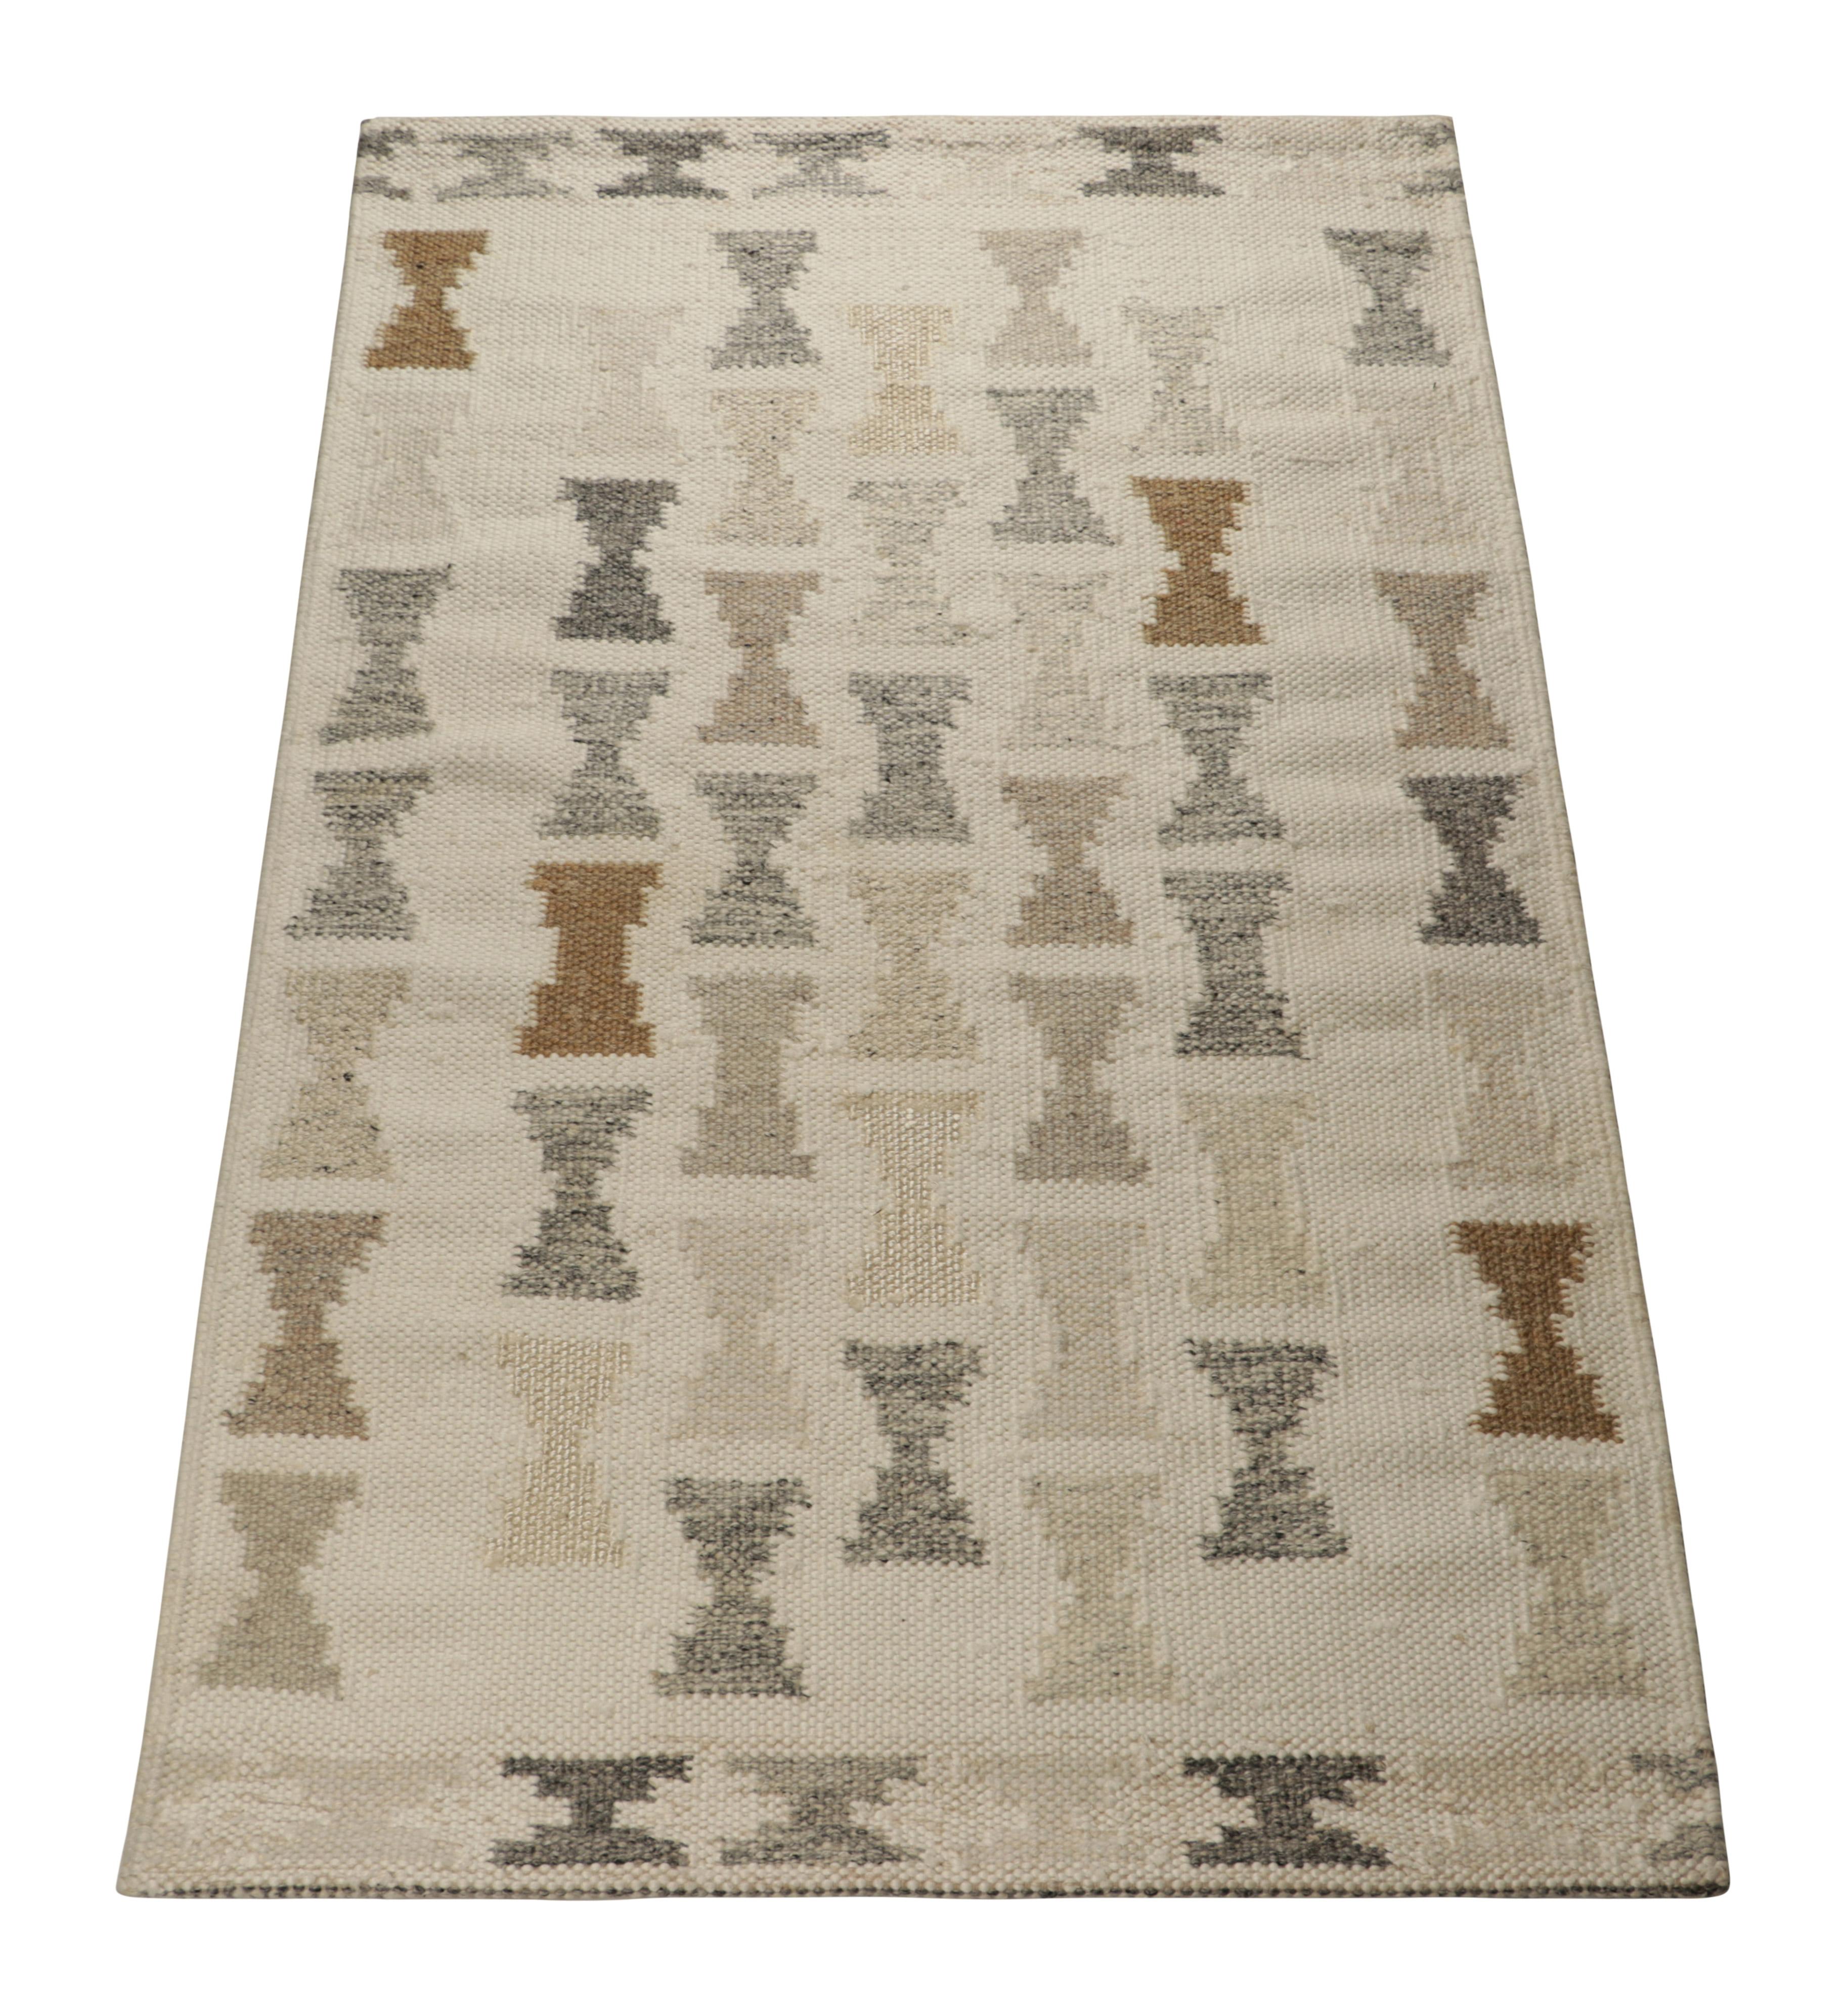 Hand-Woven Rug & Kilim’s Scandinavian Style Rug in Gray and Blue, with Hourglass Patterns For Sale